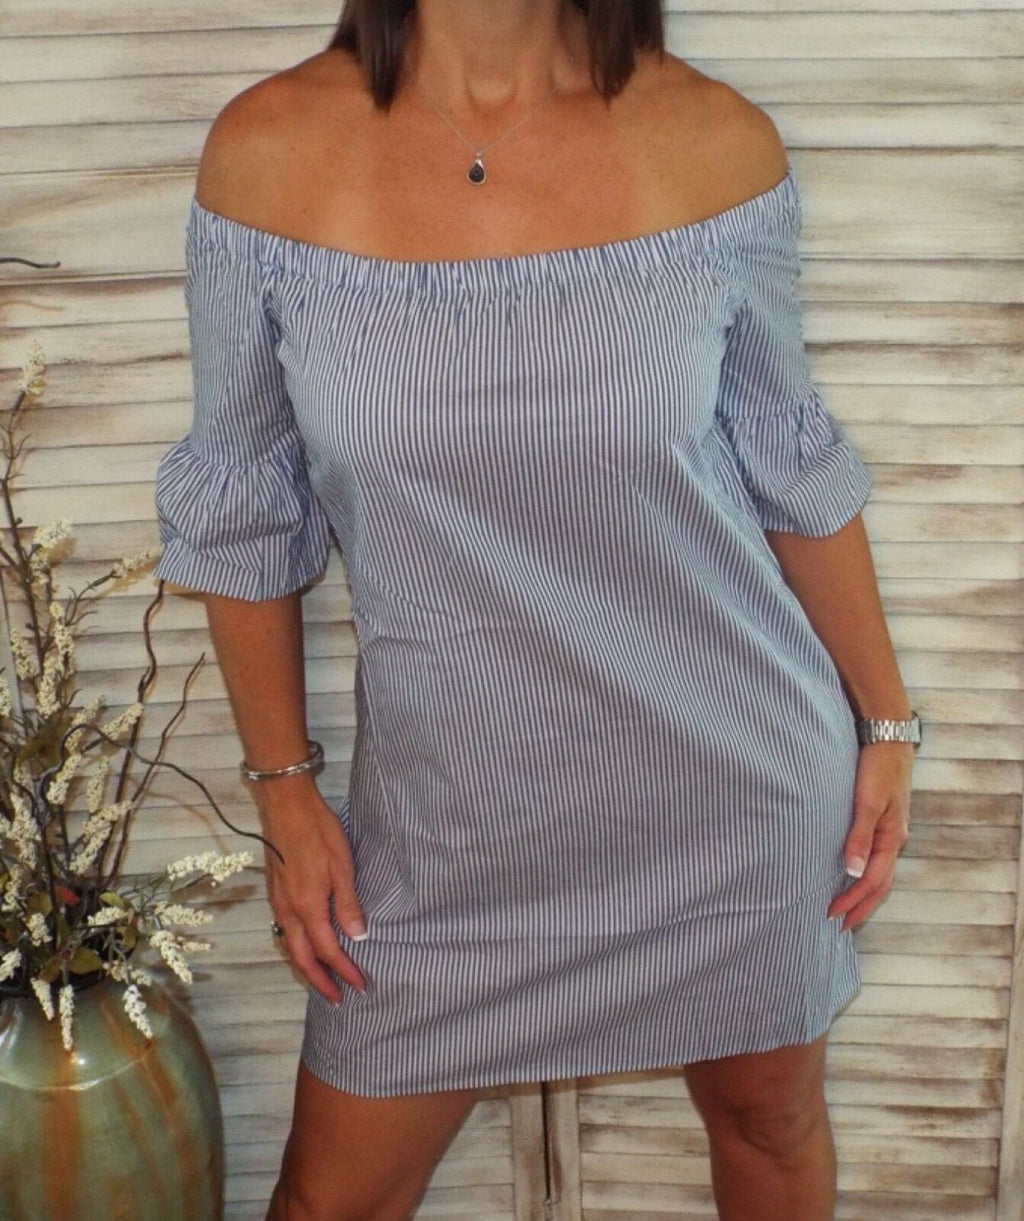 Sexy Pinstriped Off Shoulder Bell Sleeve Dress Sundress Blue White S/M/L